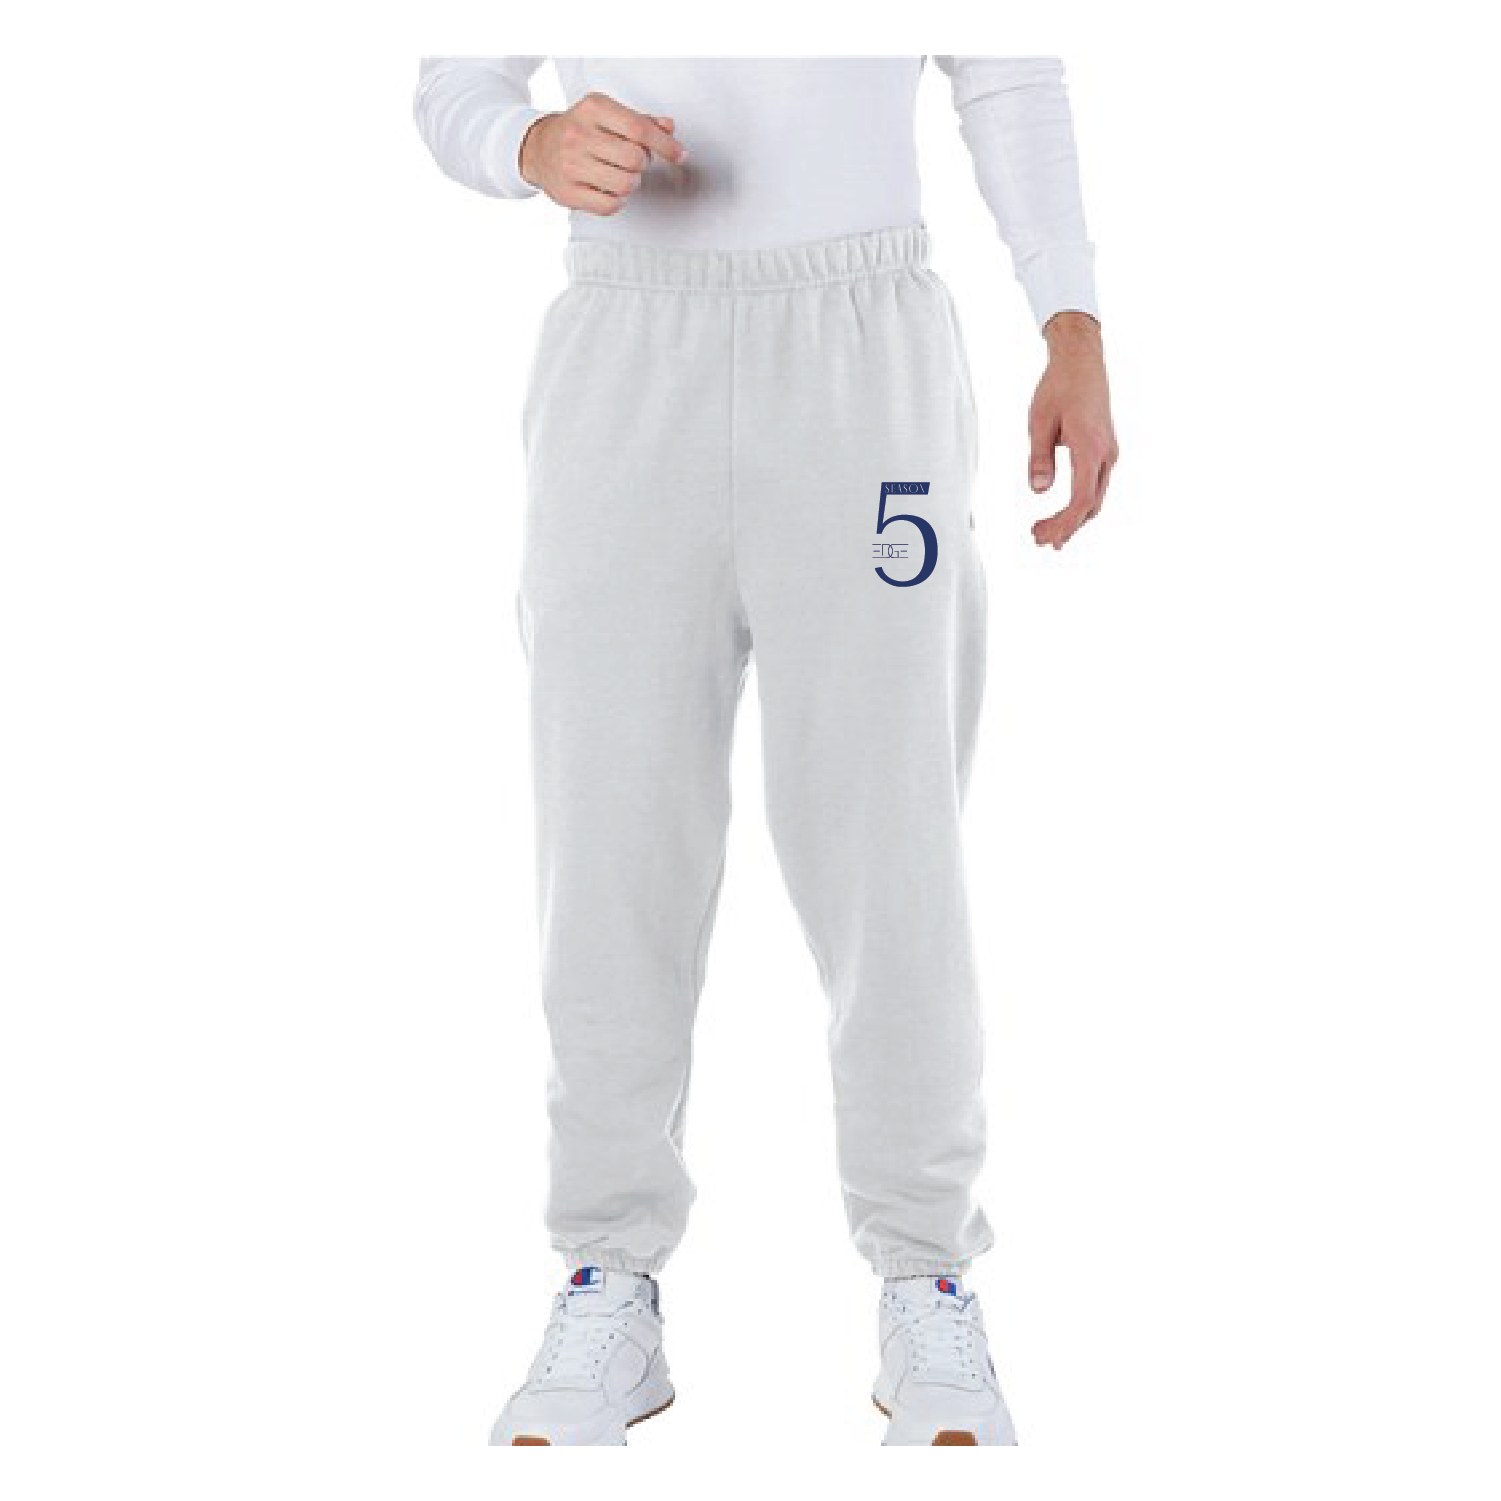 grey sweatpants that have a graphic on the pant leg including the number 5